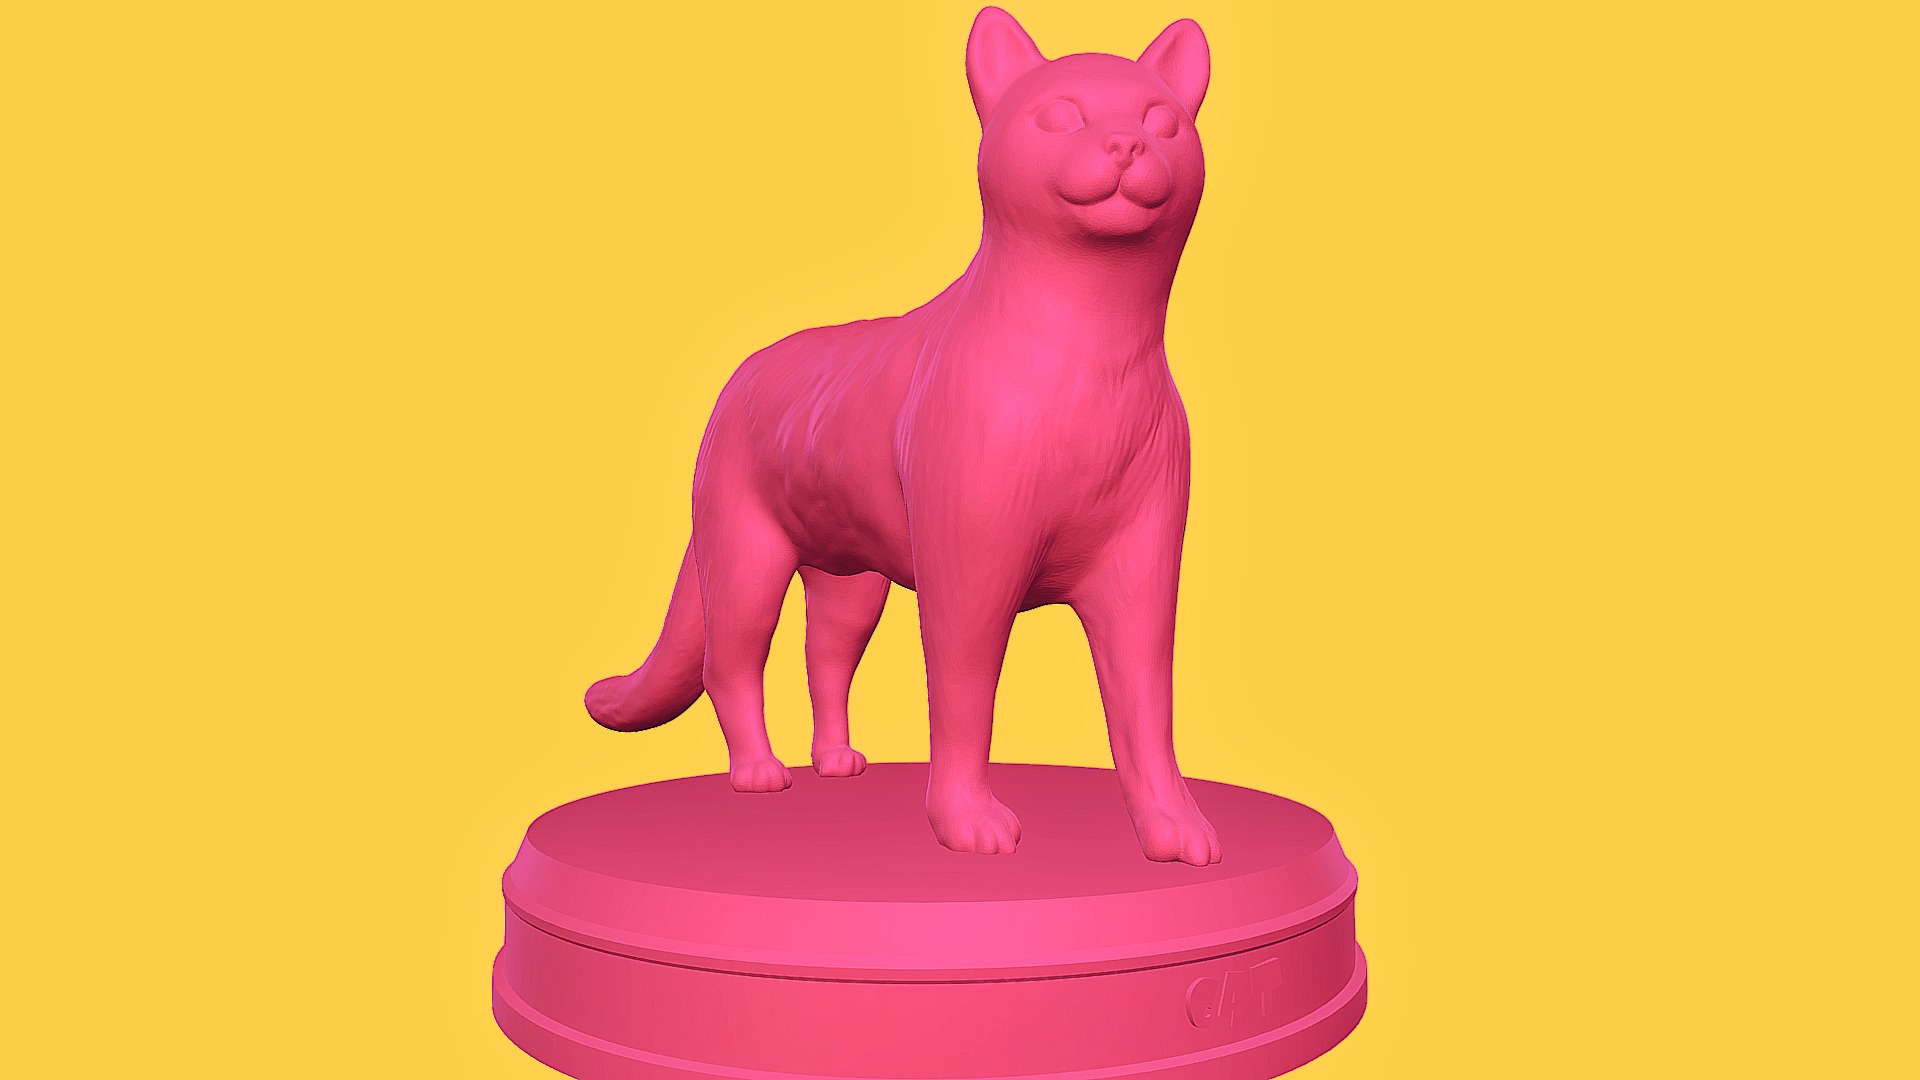 3D model Realistic Cat - This is a 3D model of the Realistic Cat. The 3D model is about a pink pig statue.